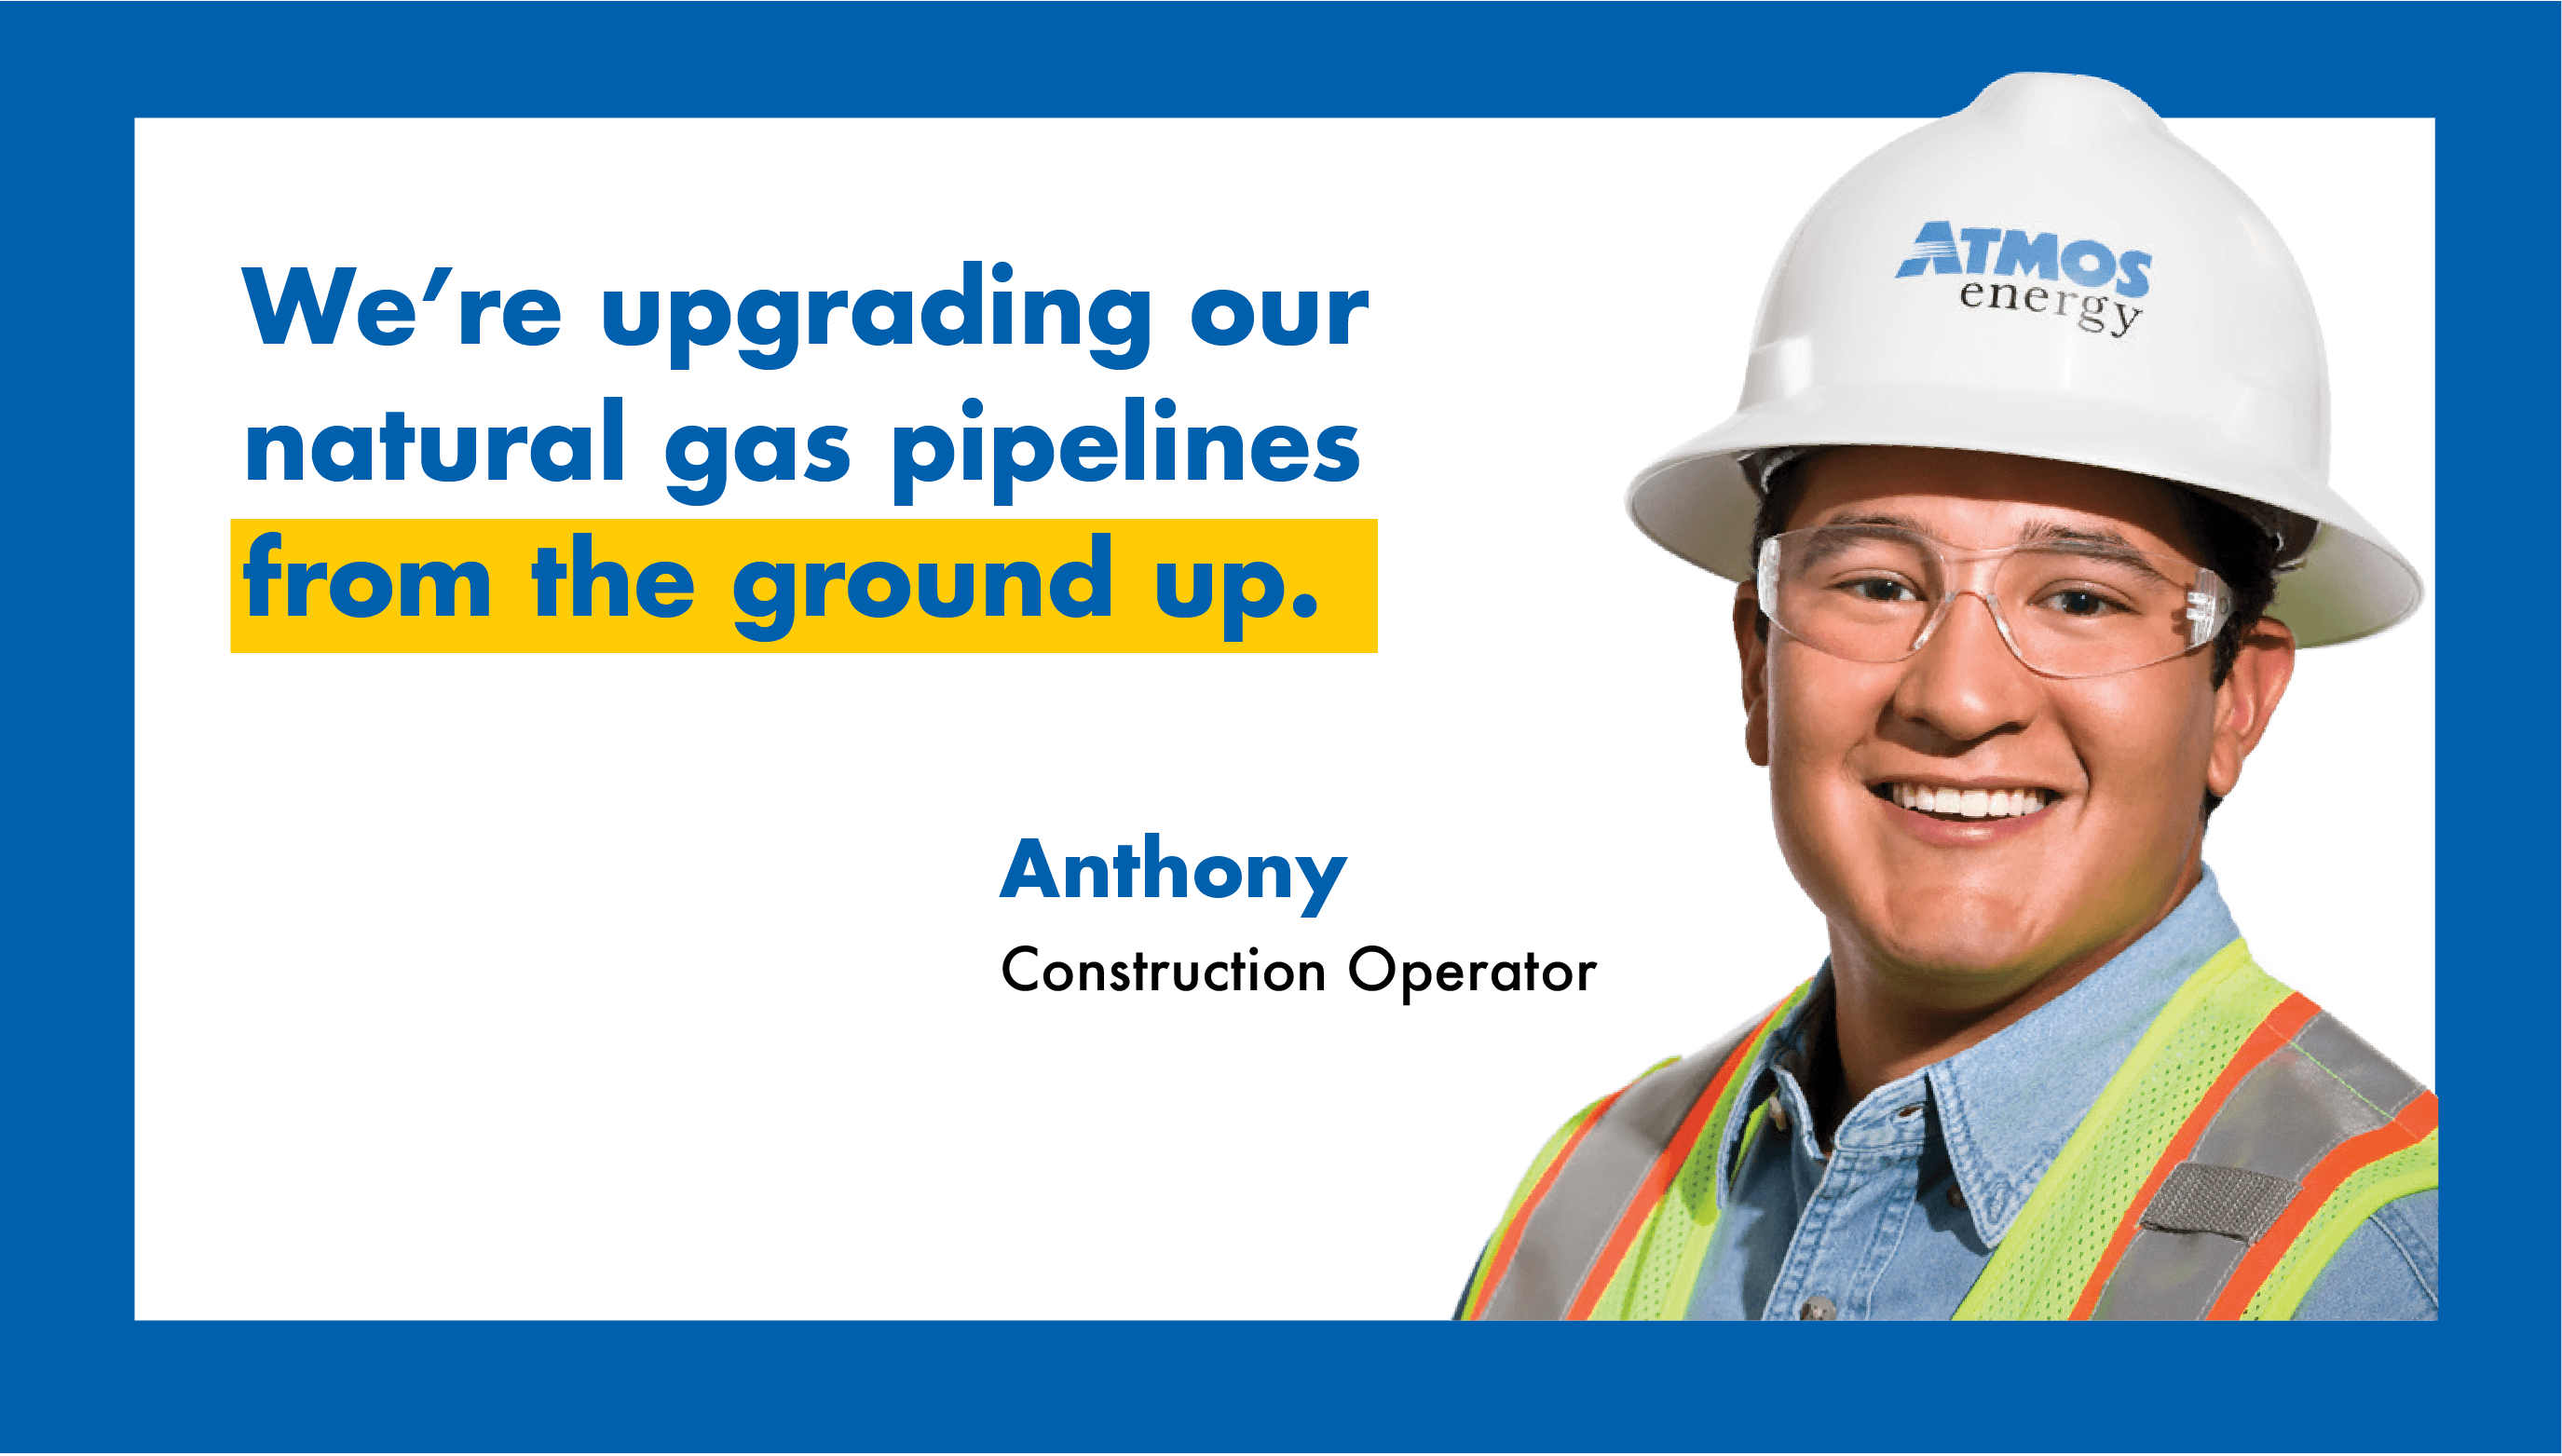 We're upgrading our natural gas pipeline from the ground up.